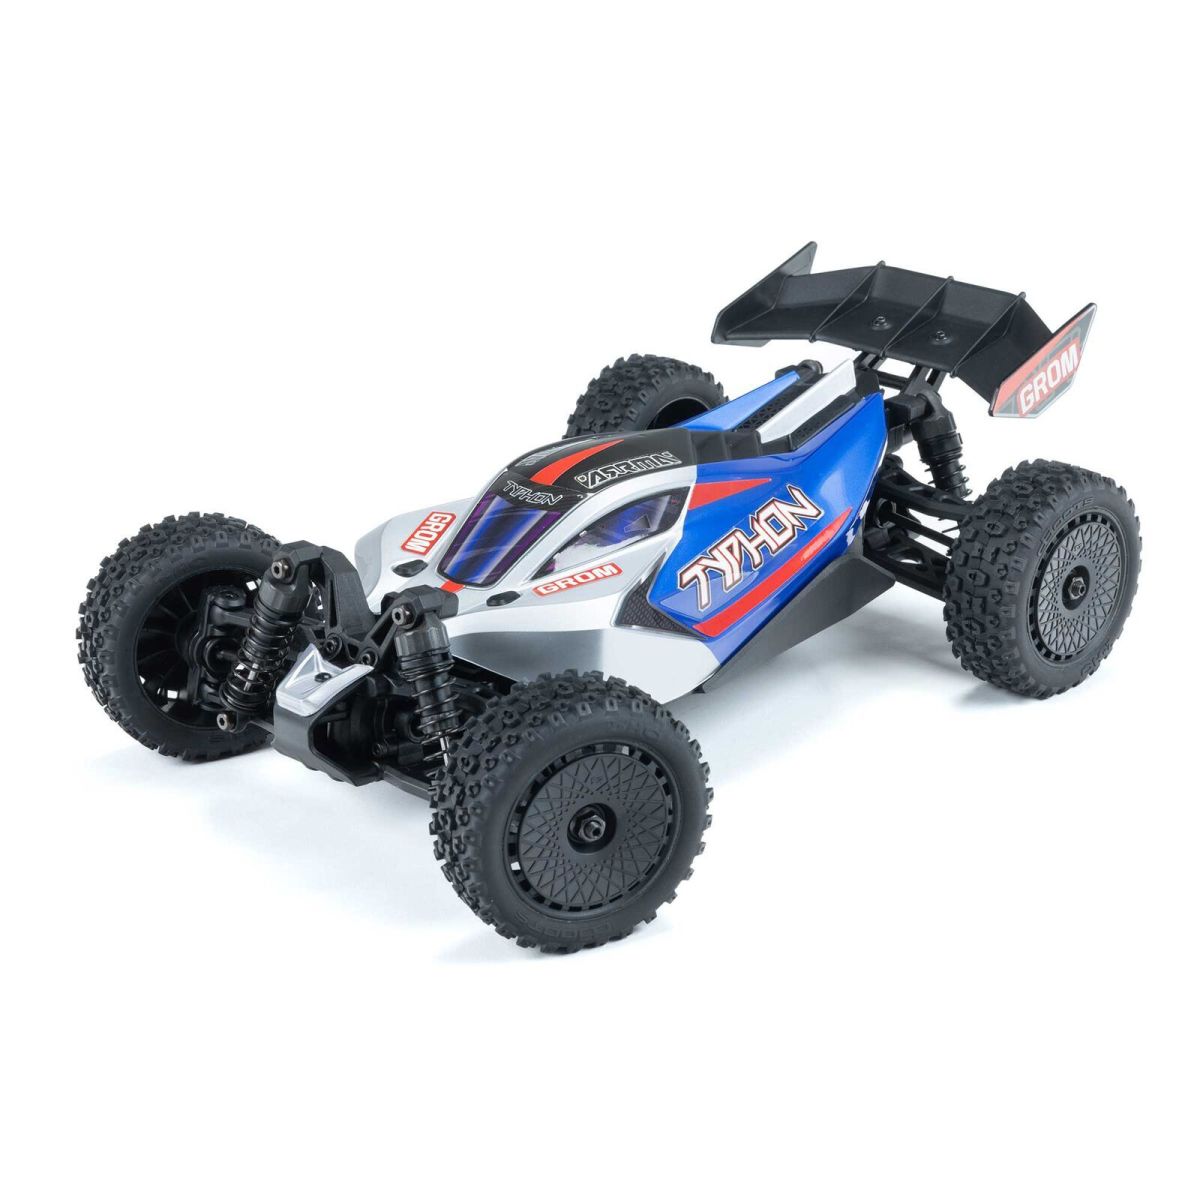 An image of one of the recommended RC car for beginners - the ARRMA Typhon Grom.